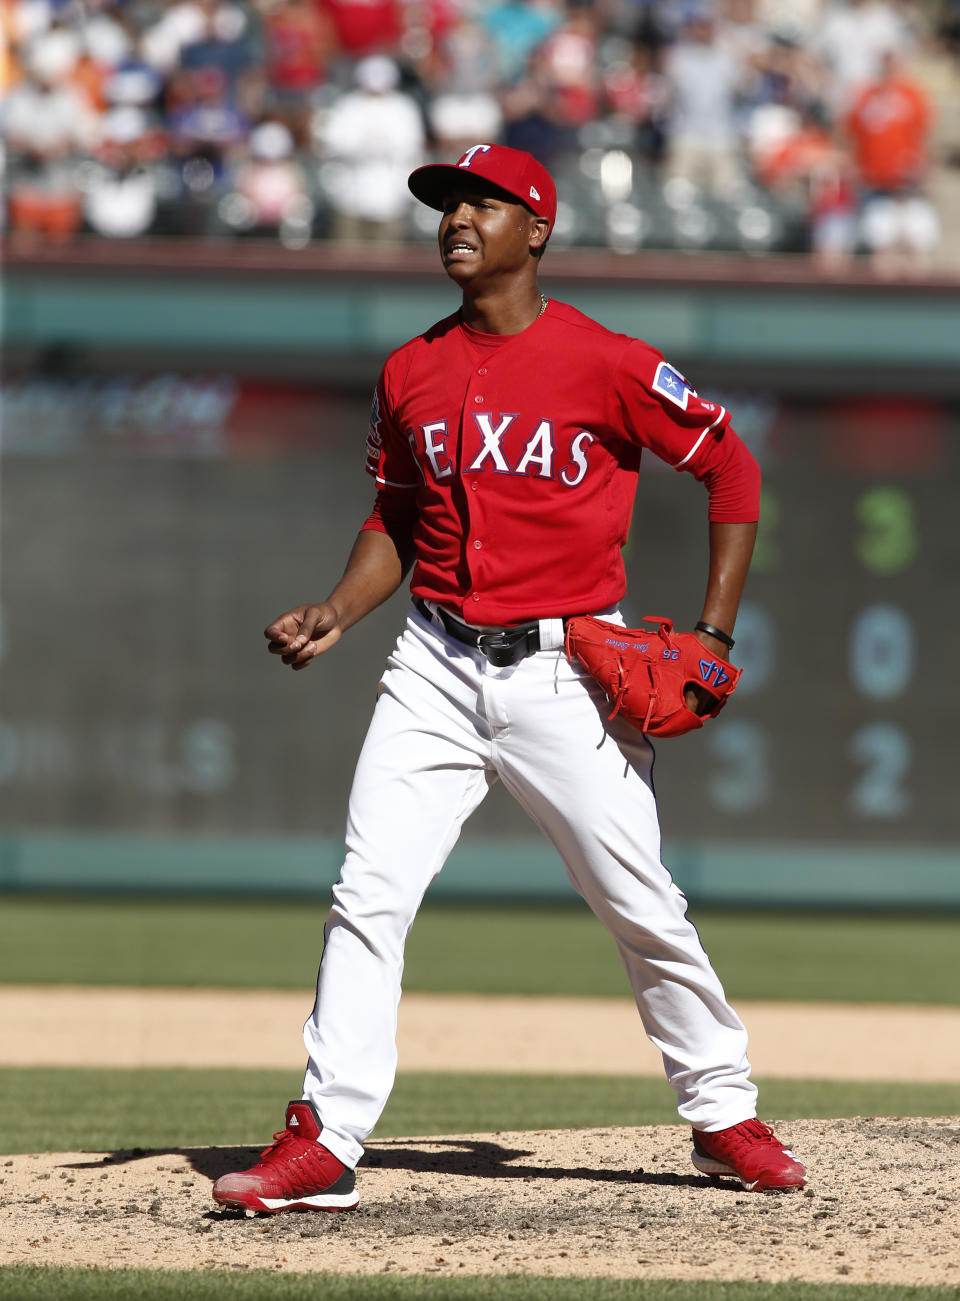 Texas Rangers pitcher Jose Leclerc reacts to a called ball against the Houston Astros during the ninth inning of a baseball game Sunday, April 21, 2019, in Arlington, Texas. (AP Photo/Mike Stone)